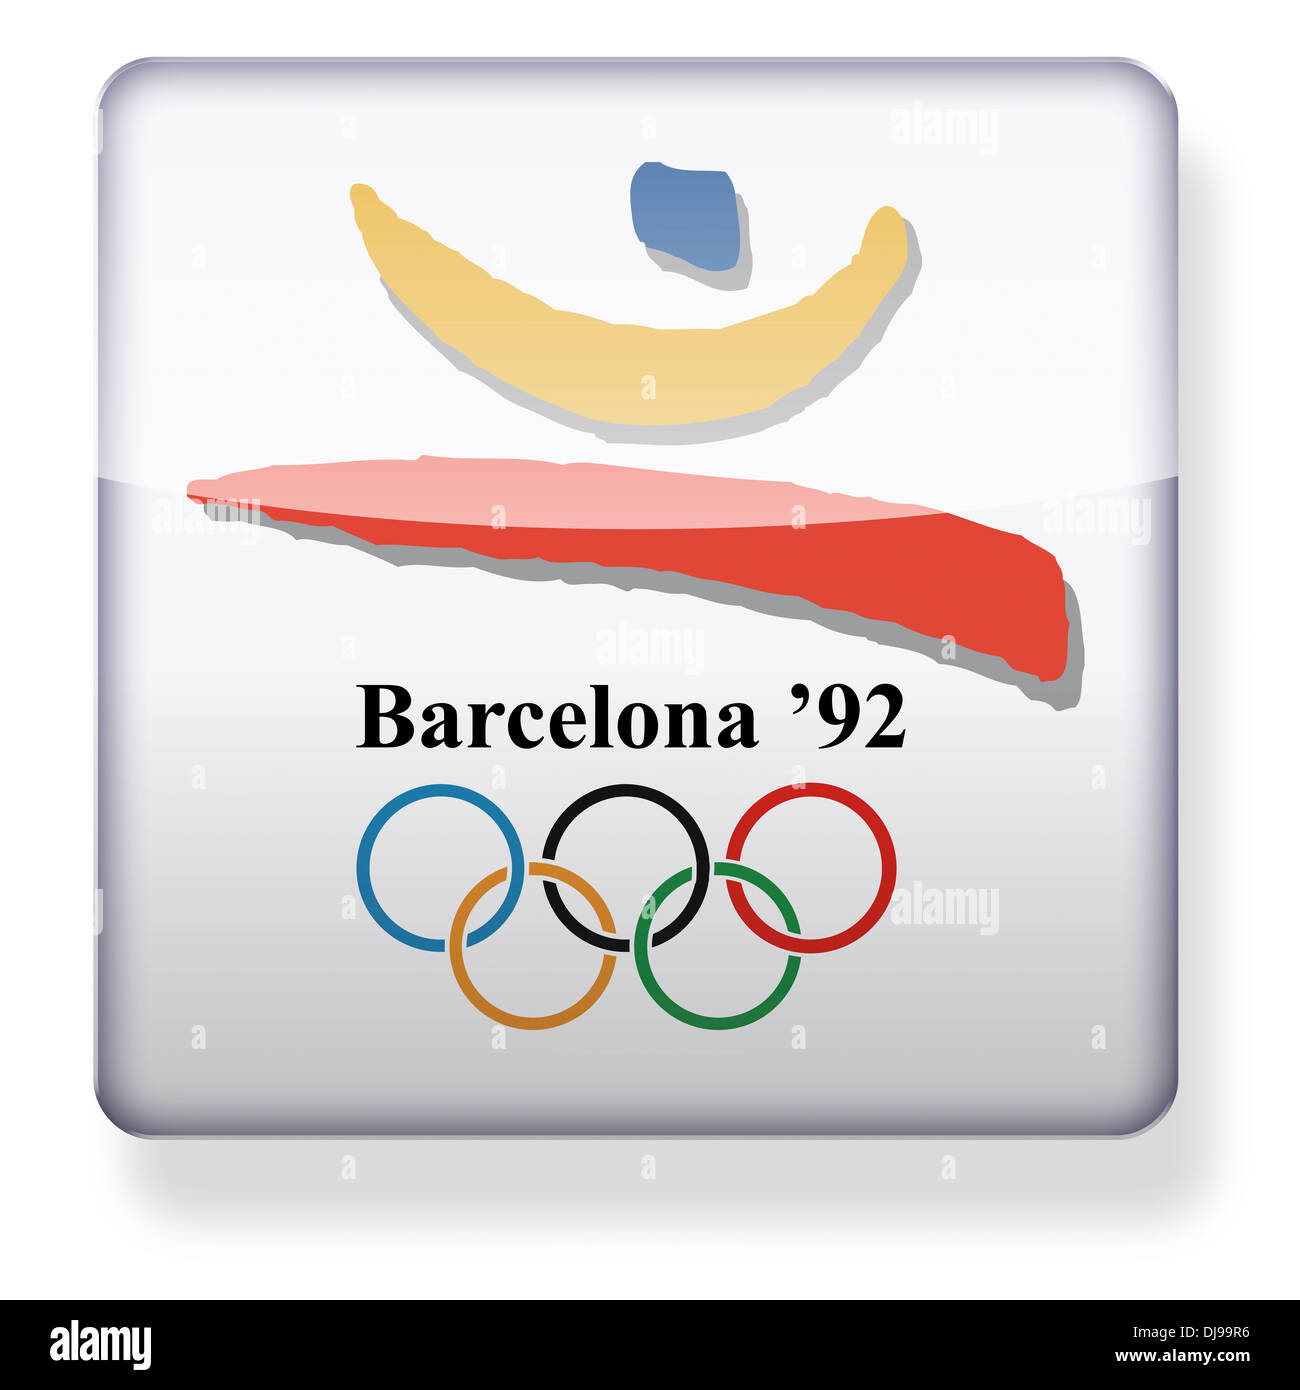 Barcelona 1992 Olympics logo as an app icon. Clipping path included. Stock Photo